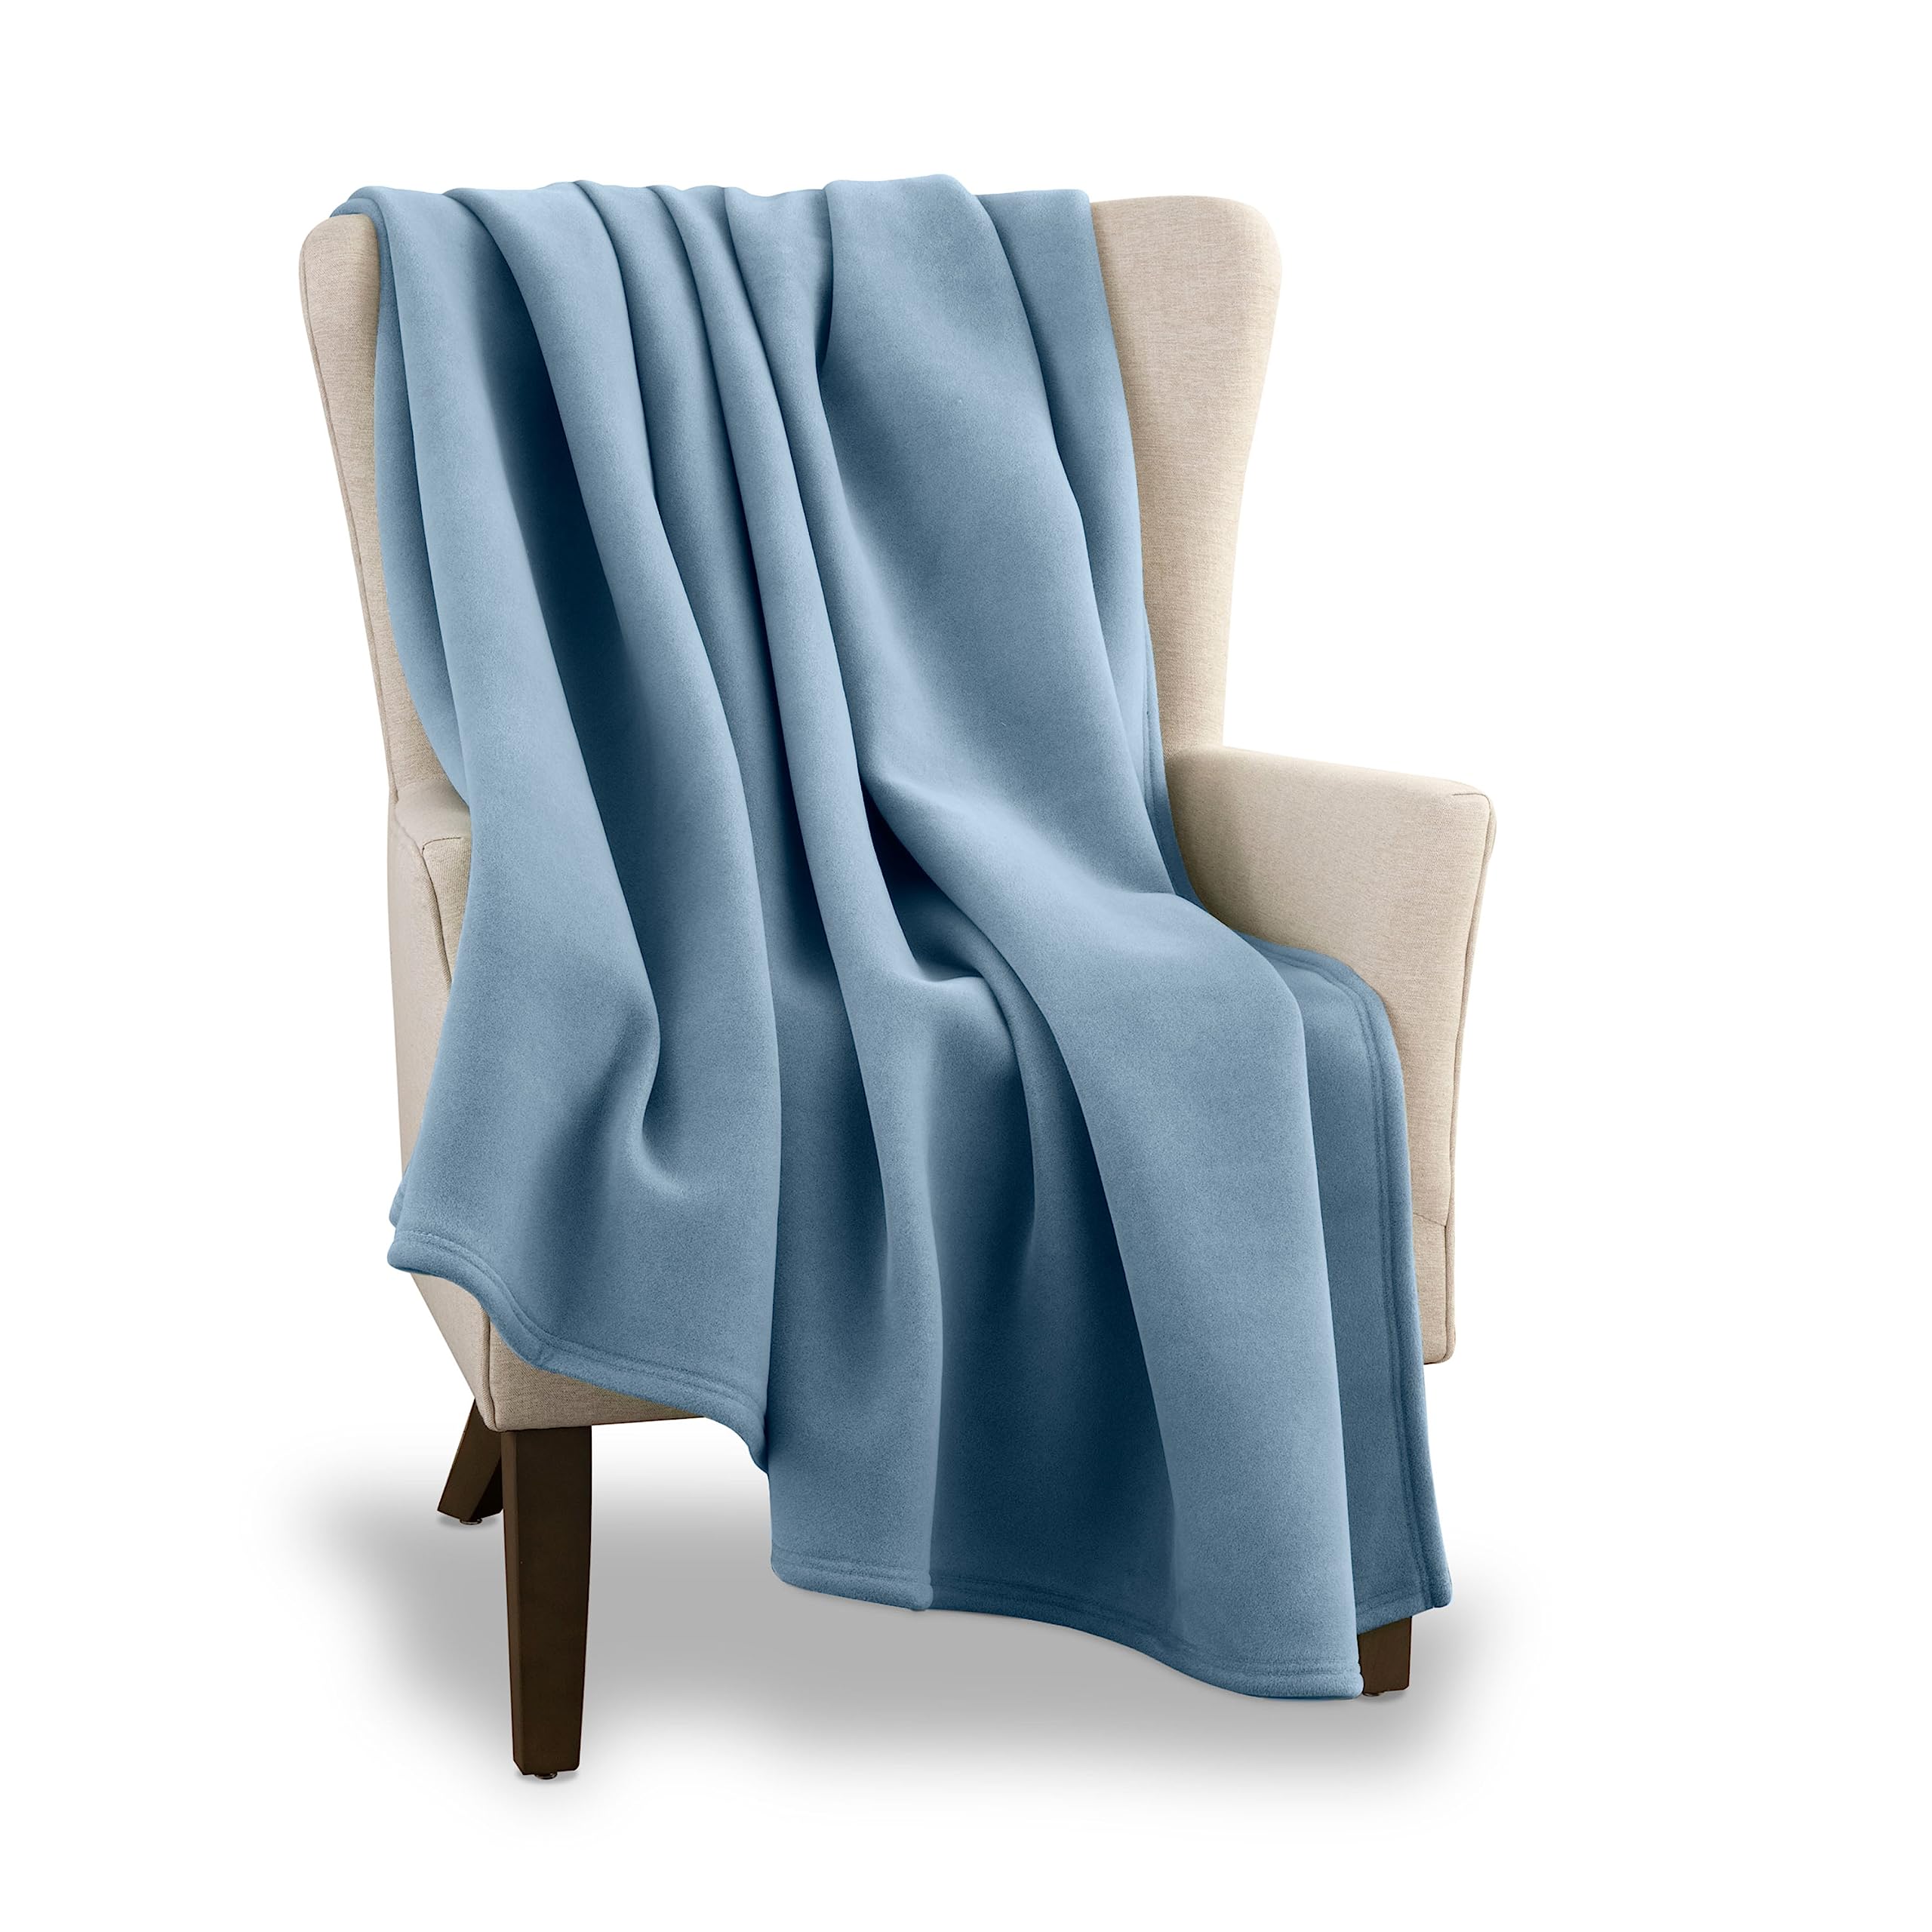 Book Cover The Original Vellux Blanket - Full/Queen, Soft, Warm, Insulated, Pet-Friendly, Home Bed & Sofa - Wedgewood Blue